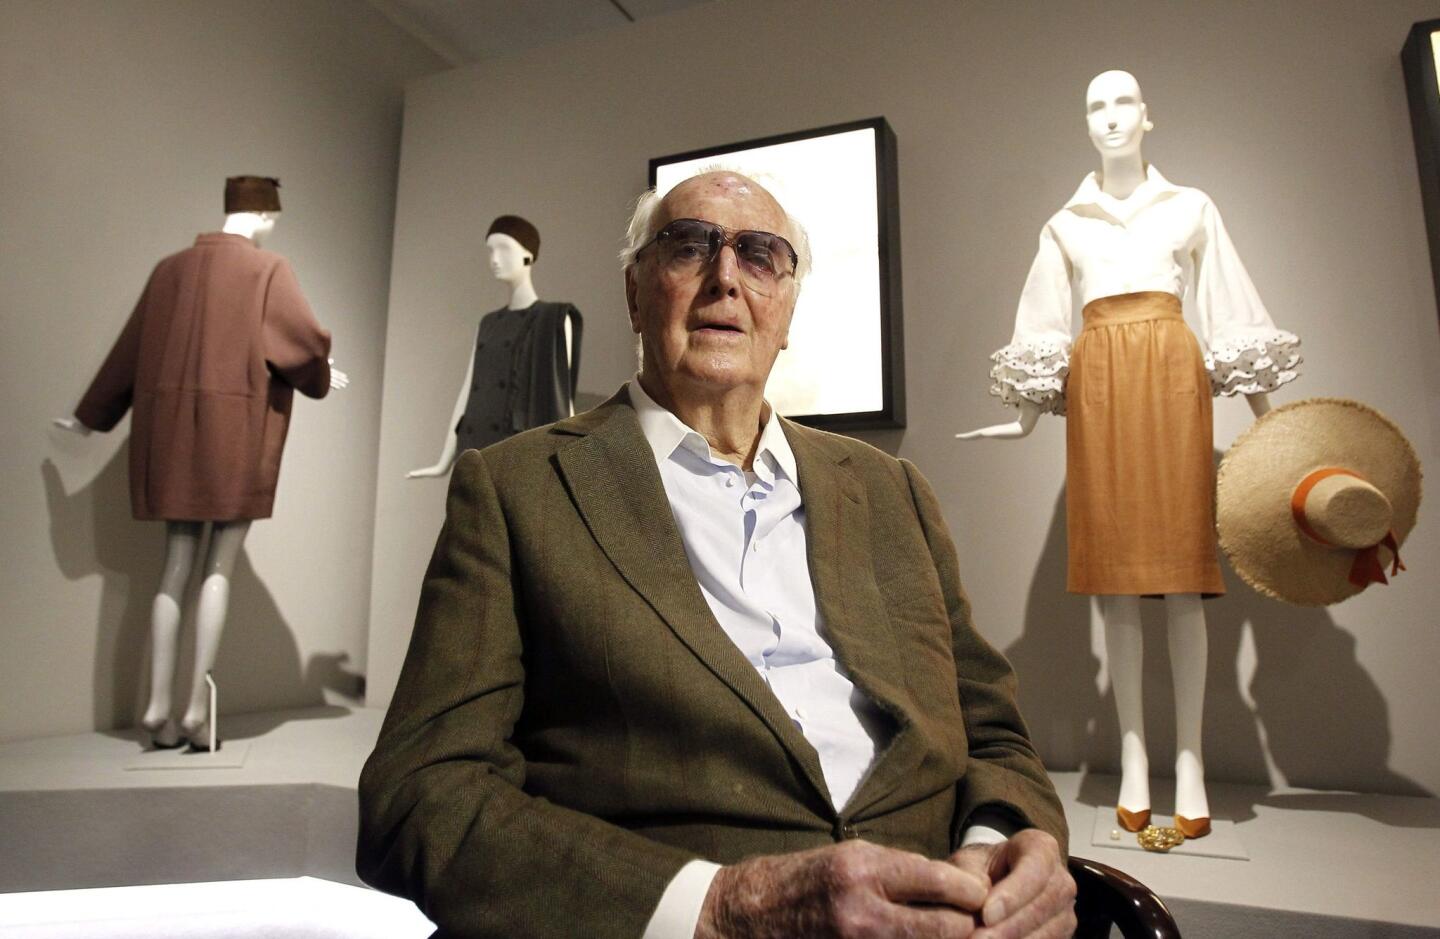 French designer Hubert de Givenchy in front of his creations during an interview on his exhibition "Hubert de Givenchy" at the Thyssen-Bornemisza Museum in Madrid.